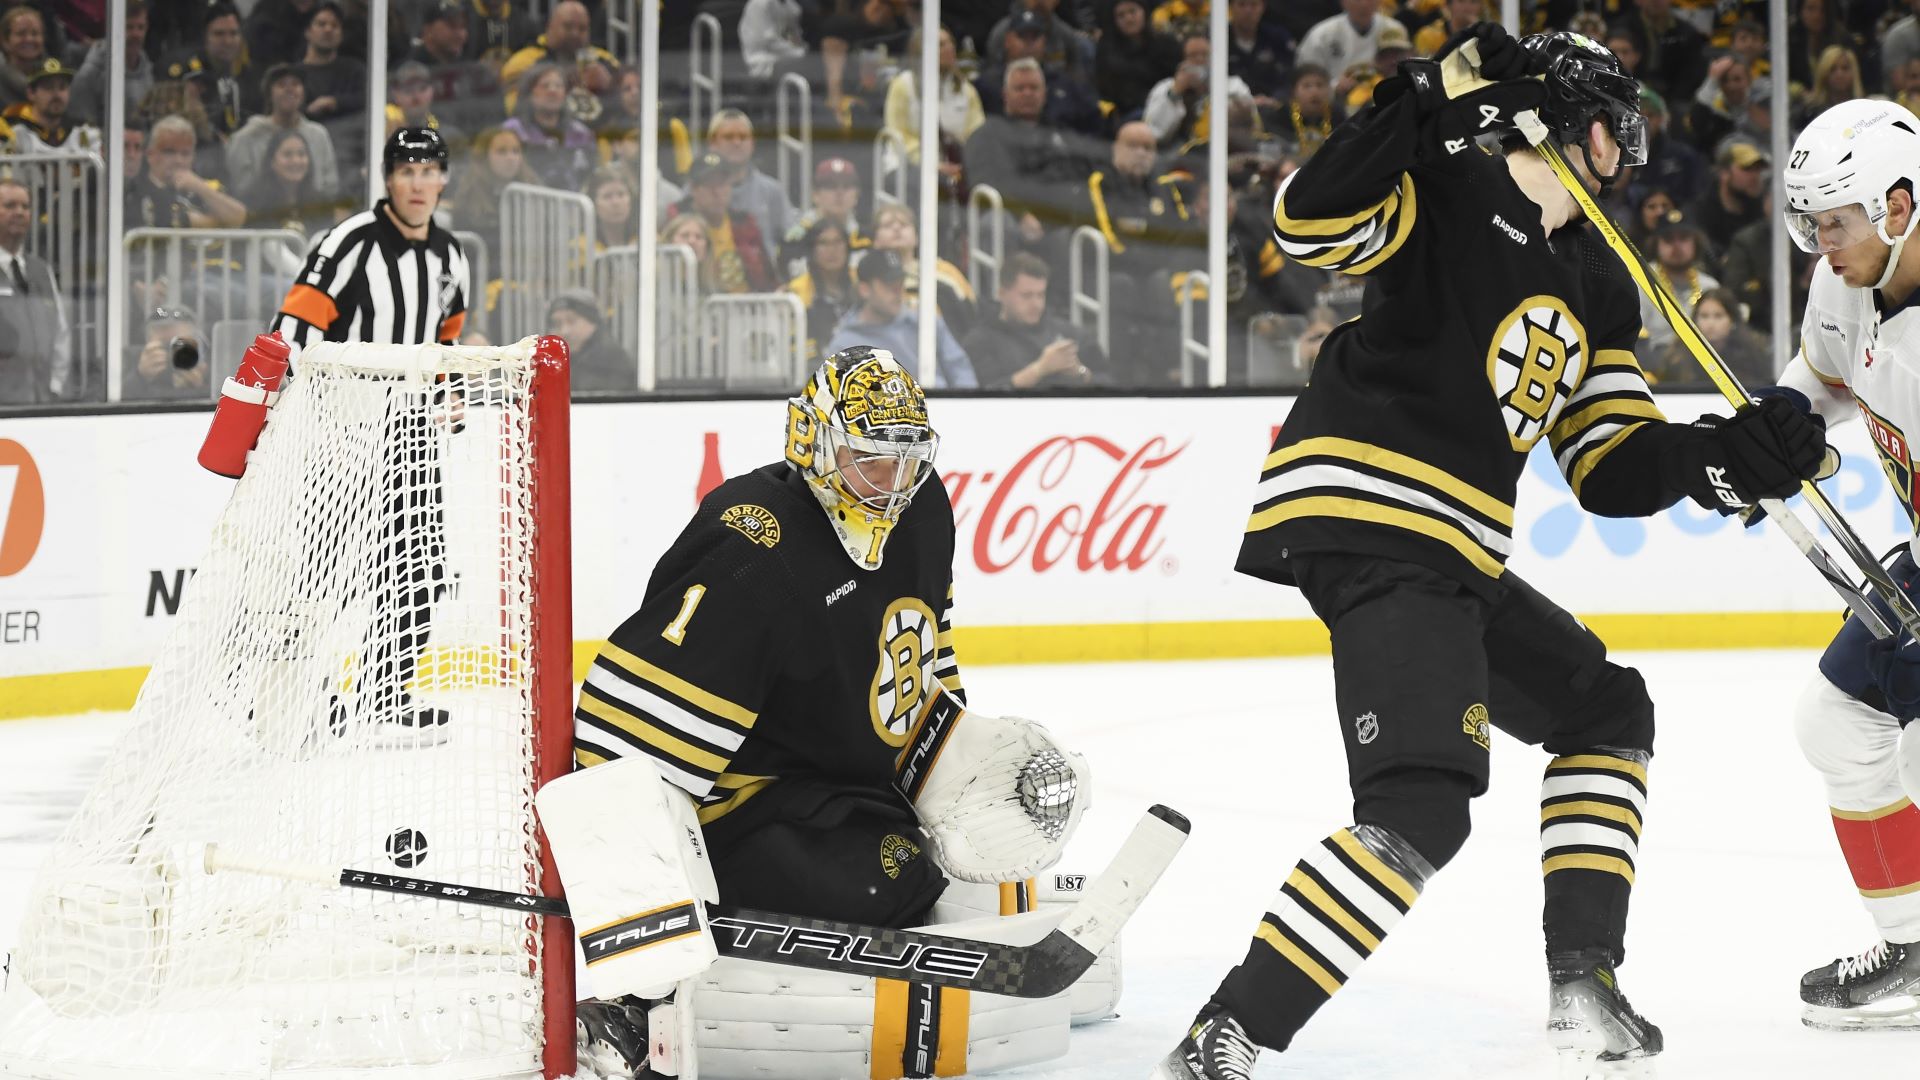 Bruins’ Jeremy Swayman Offers Blatant Stance On Controversial
Panthers’ Goal